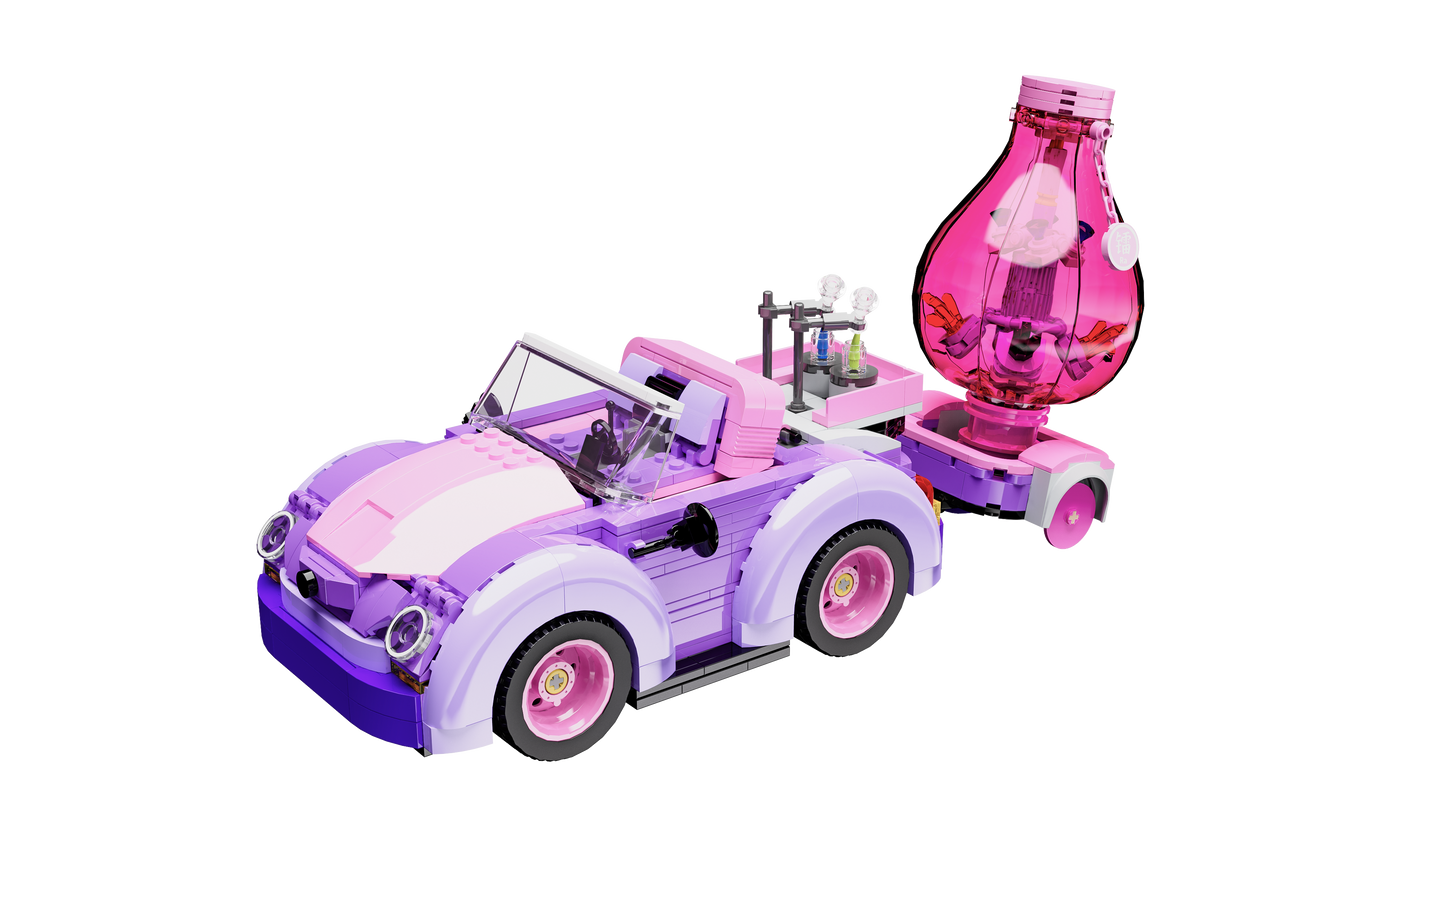 Magic Curie APP controled vehicle Stem Toy Kit for Girls 6+ Years old